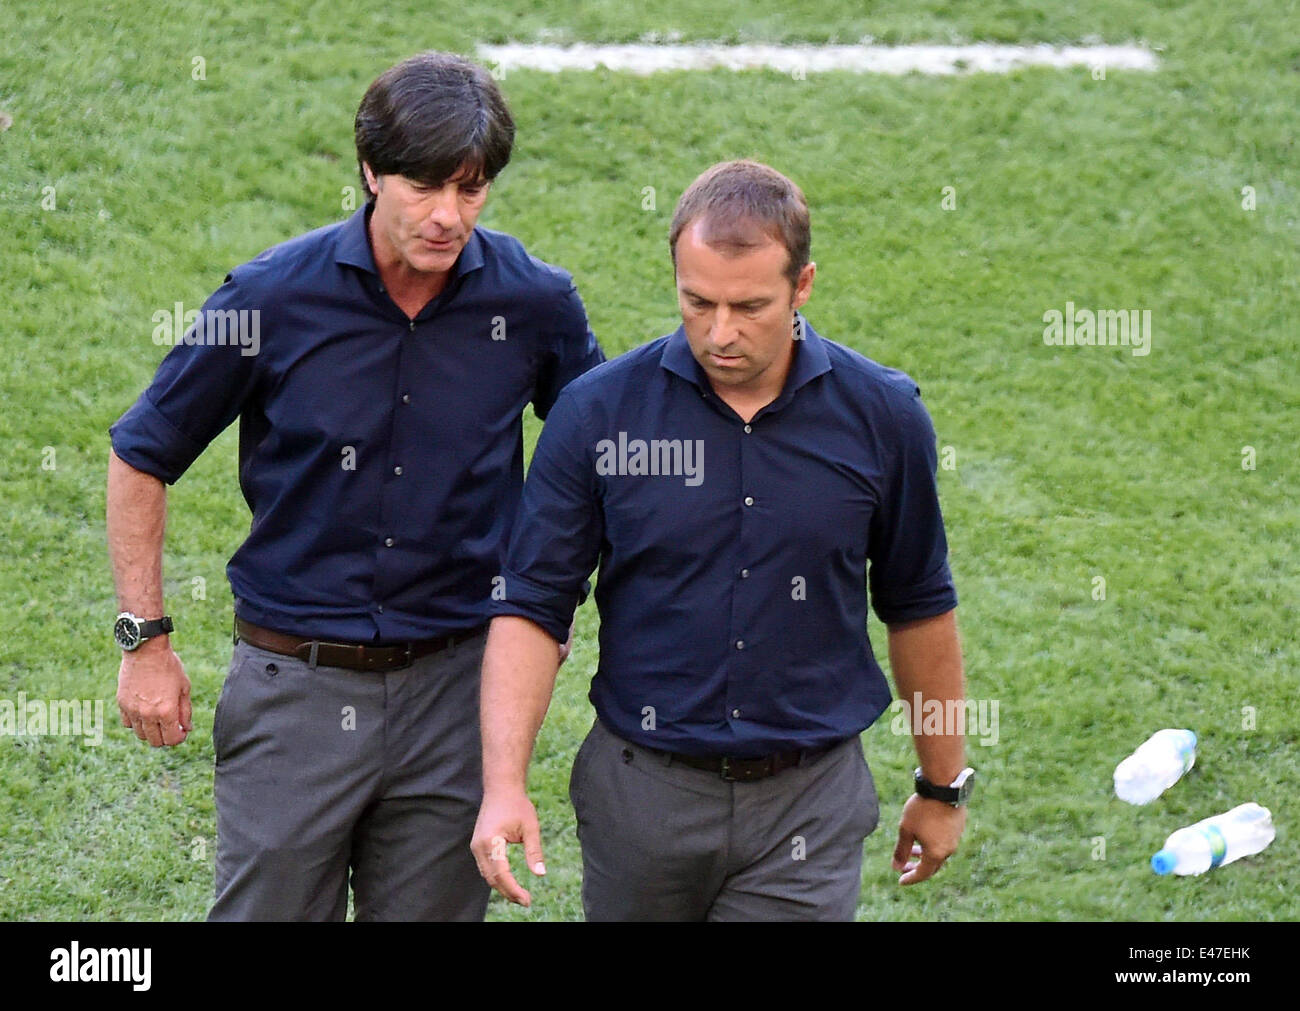 Rio de Janeiro, Brazil. 04th July, 2014. Head coach Joachim Loew of Germany and assistant coach Hansi Flick (R) during the FIFA World Cup 2014 quarter final soccer match between France and Germany at Estadio do Maracana in Rio de Janeiro, Brazil, 04 July 2014. Photo: Marcus Brandt/dpa/Alamy Live News Stock Photo